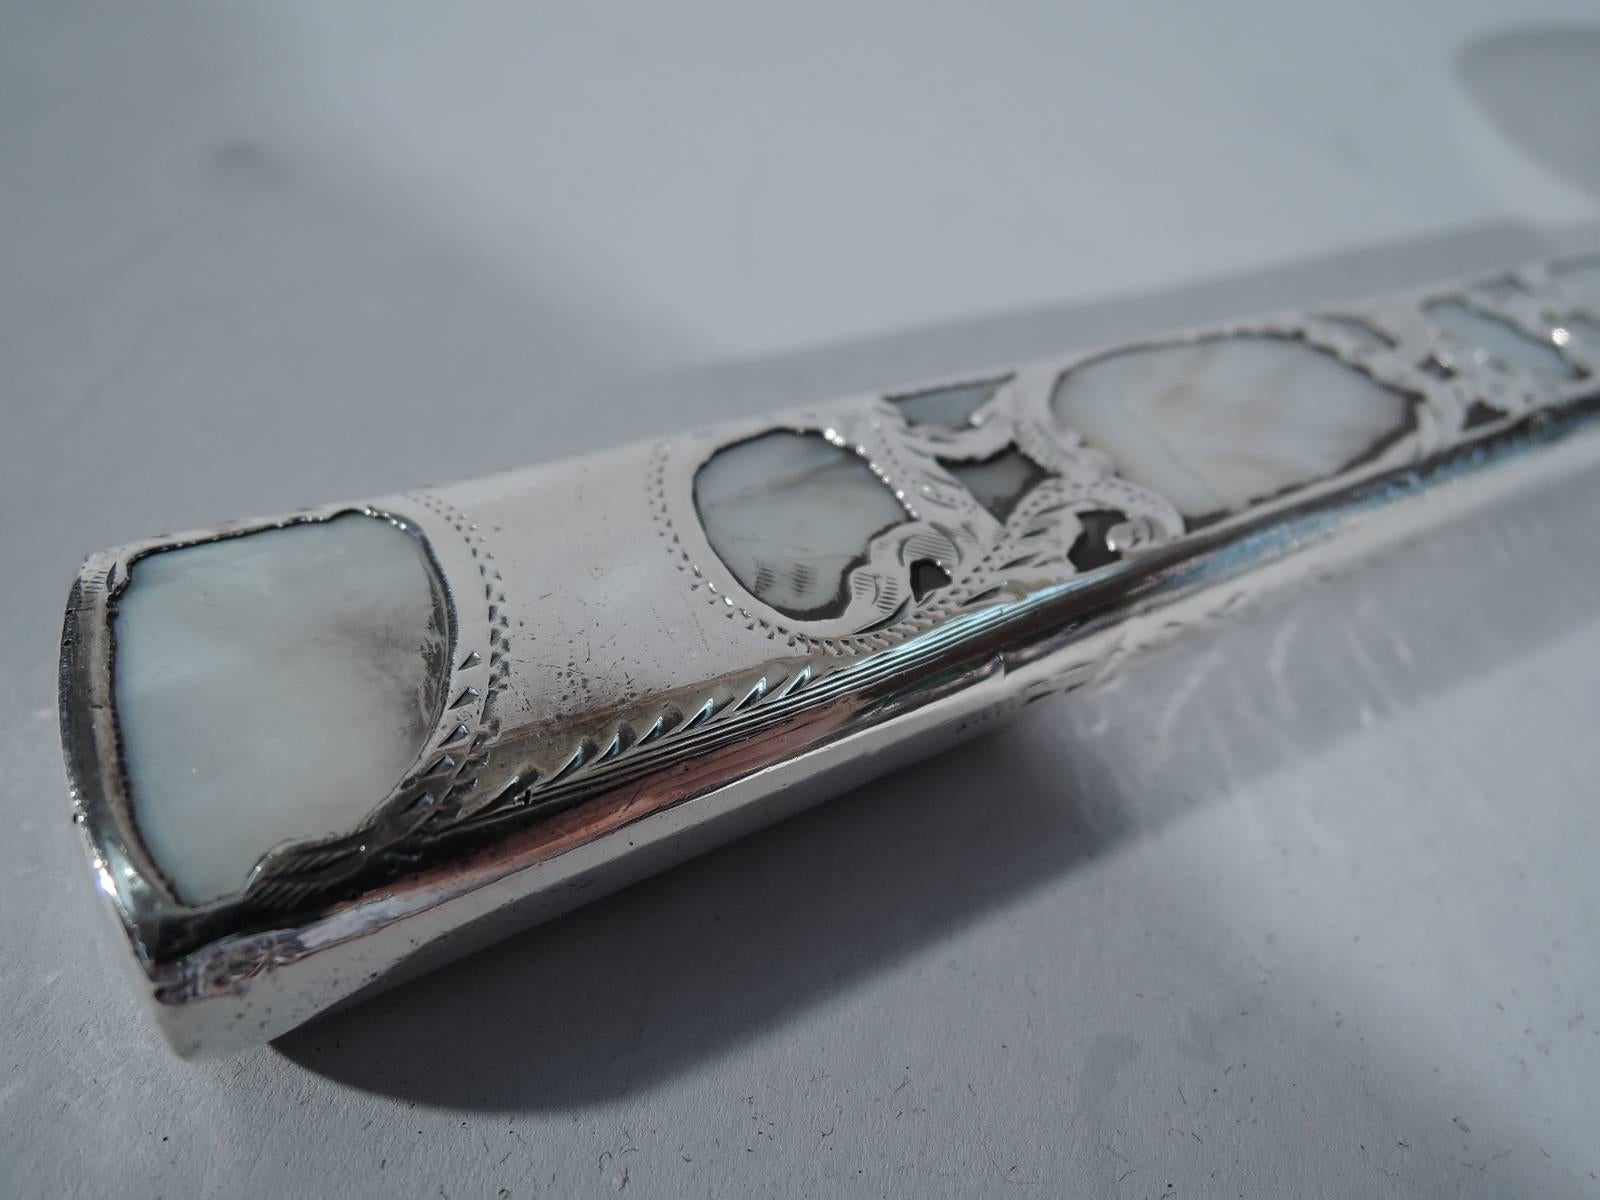 Antique magnifying glass, circa 1900. Tapering mother-of-pearl handle overlaid with silver scrollwork. Circular lens in metal frame. Handle marked 